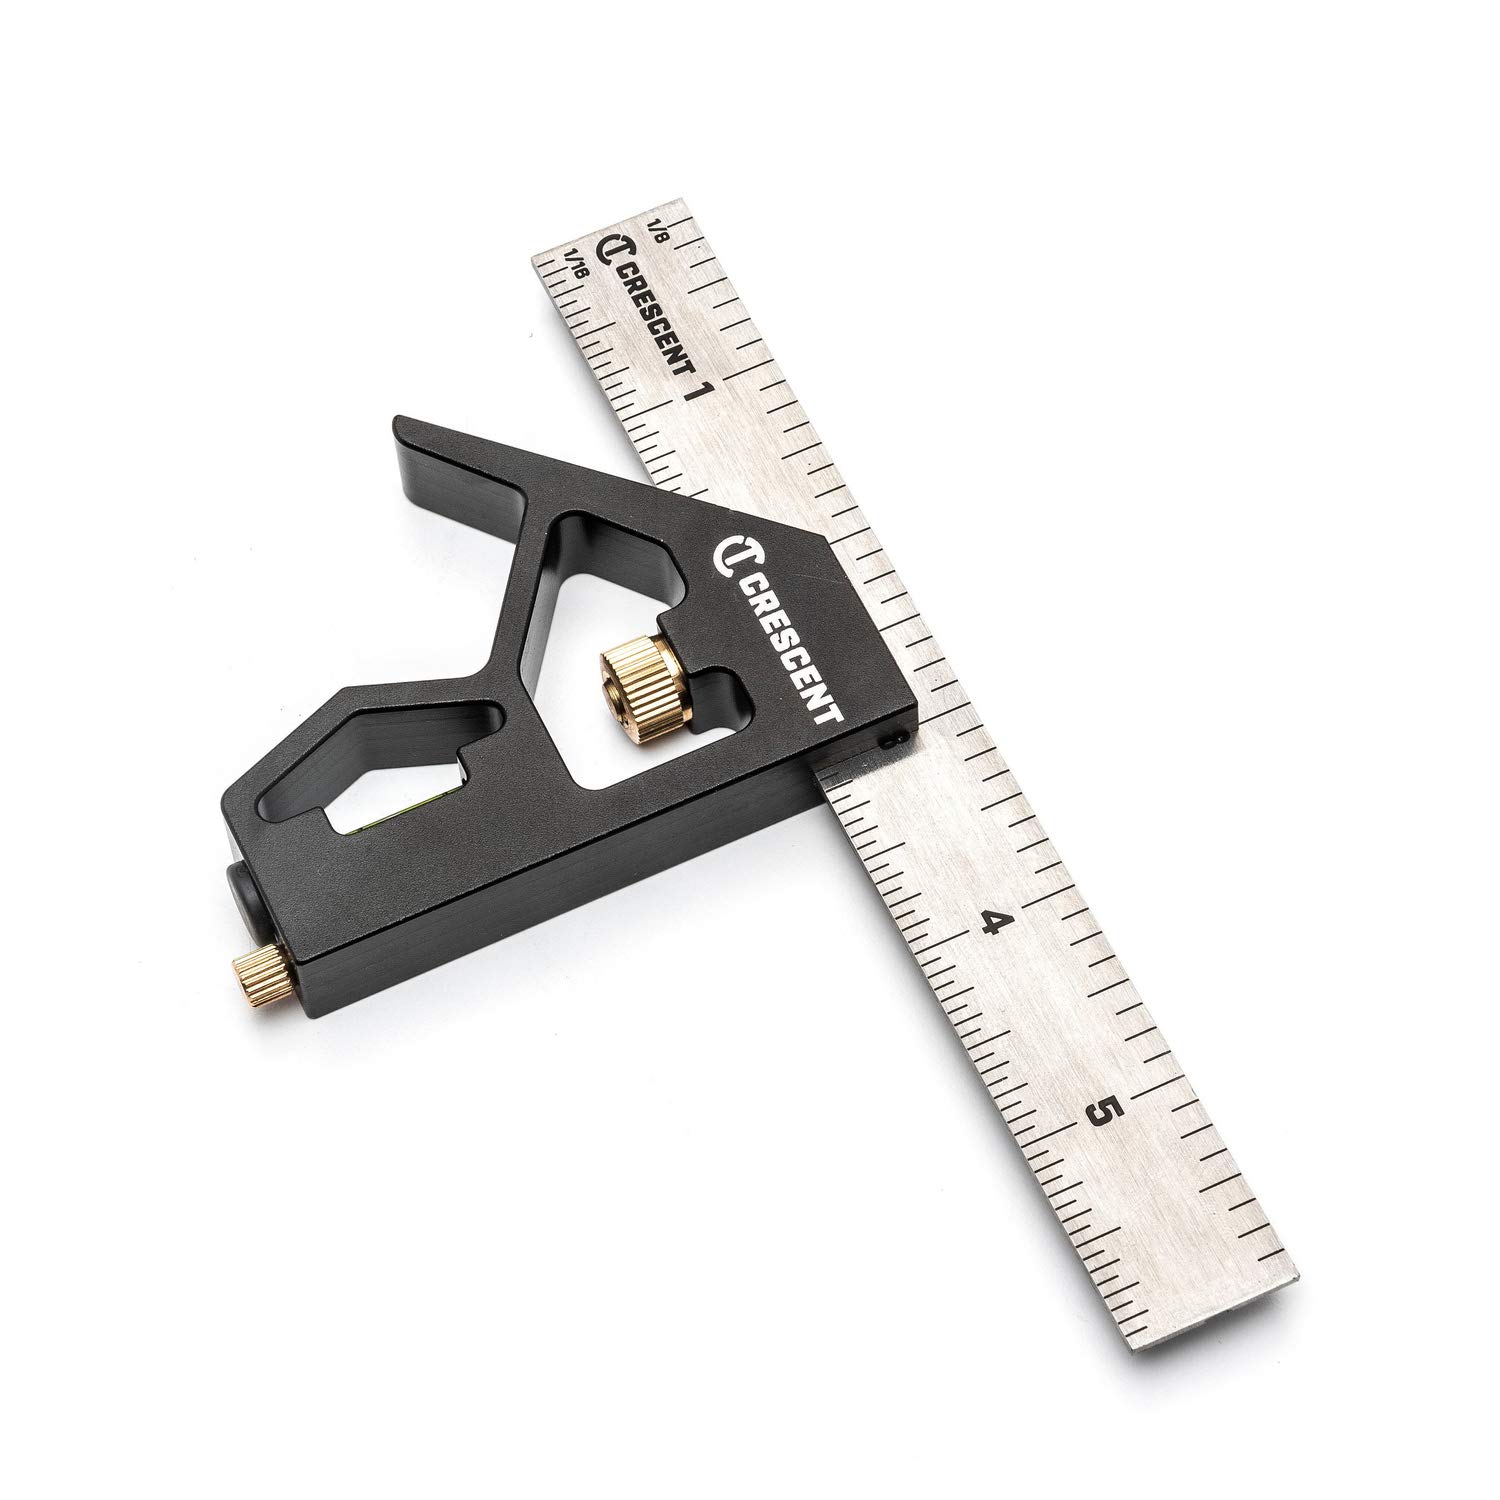 6" Crescent Lufkin Combo Square (L06CS) $7 + Free Shipping w/ Prime or on $35+